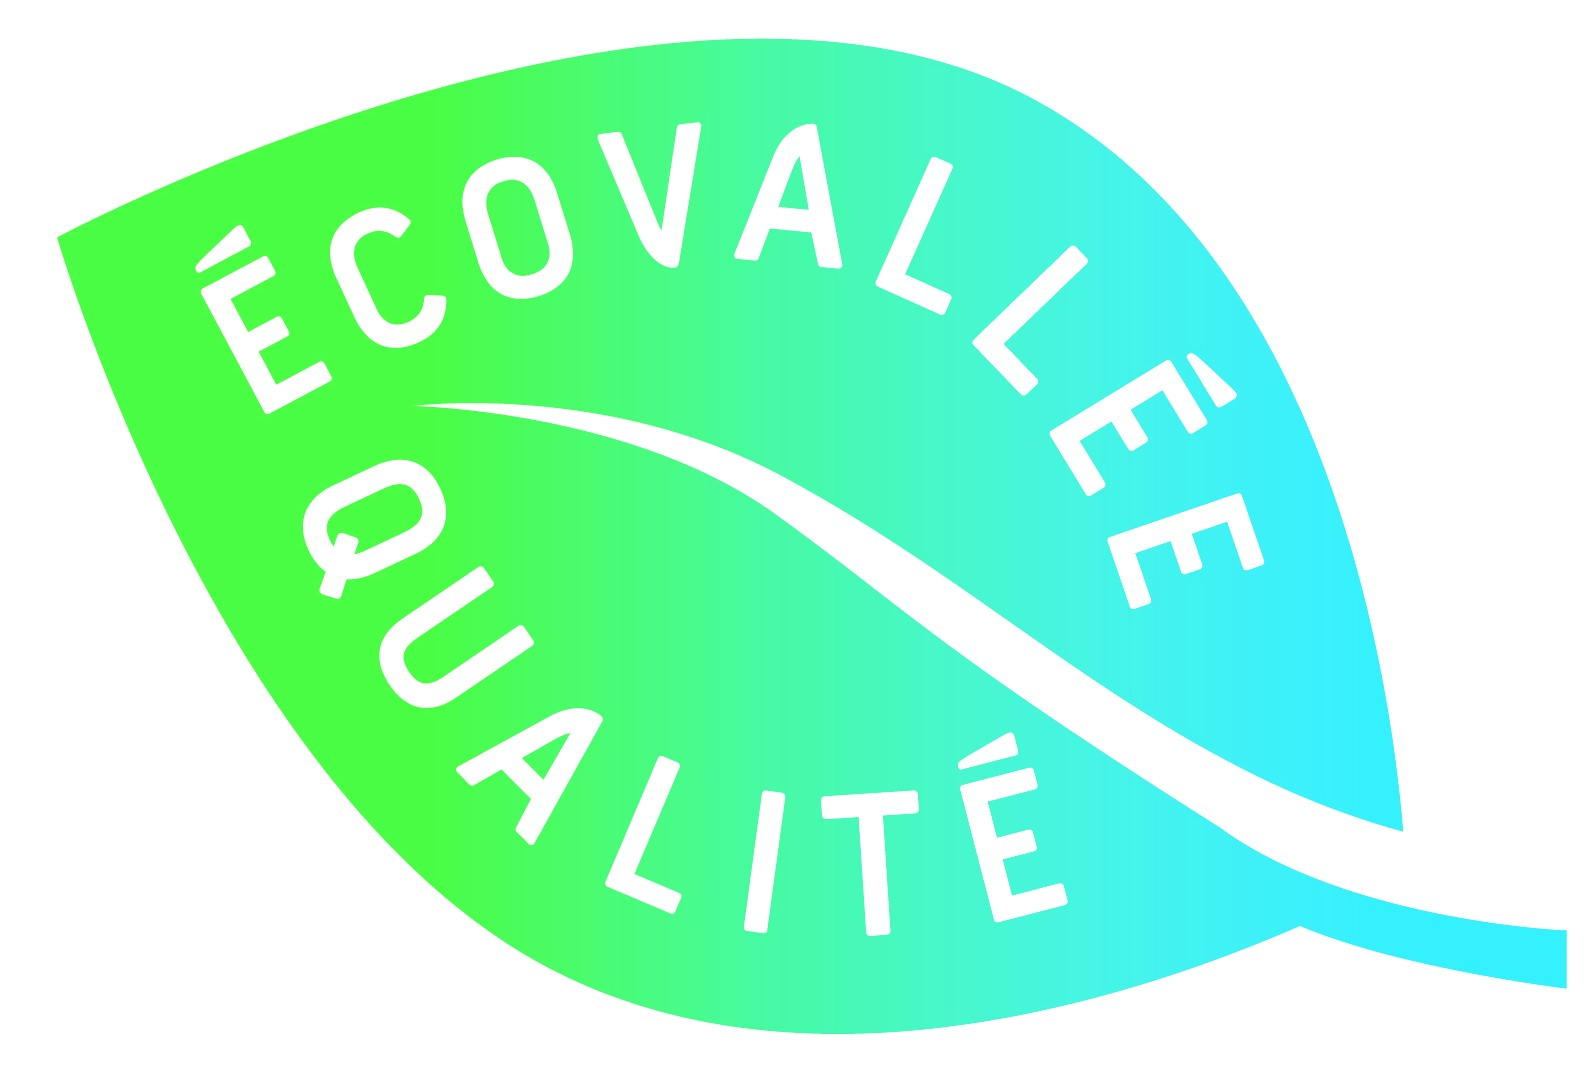 ecovallee